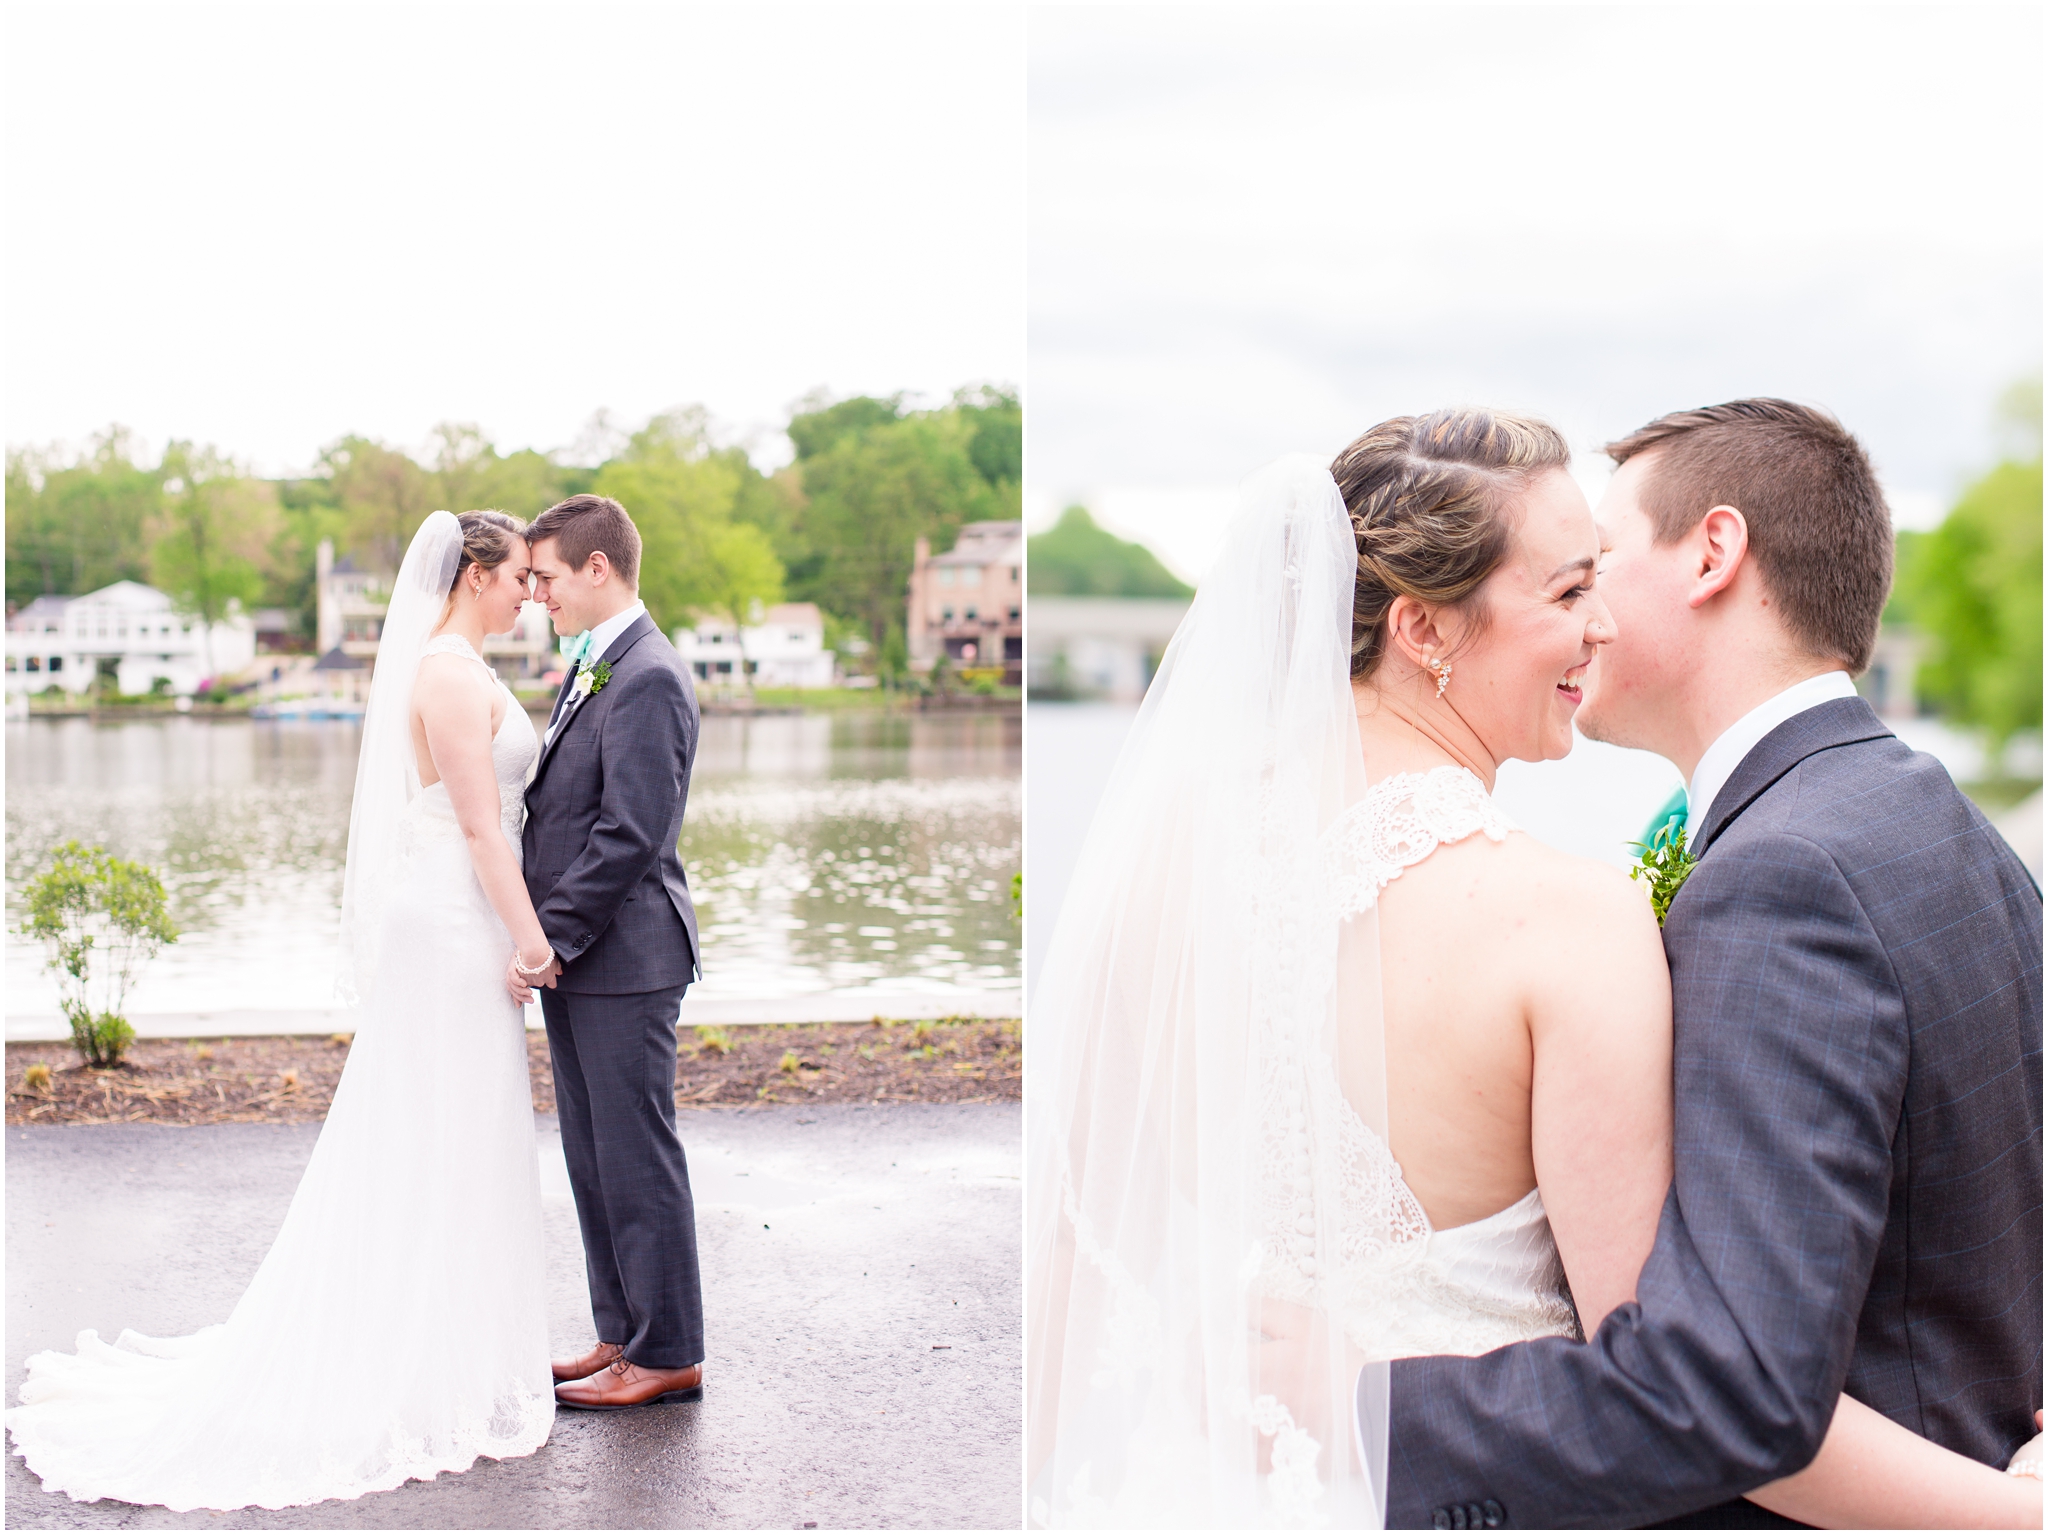 This River View at Occoquan wedding included unique centerpieces, ethical wedding vendors, and took place at one of the most beautiful virginia wedding venues. DC wedding photographer Taylor Rose Photography captured this charitable wedding as a wedding photographer who gives back to A21 to bring hope from human trafficking. Mallory Rood helped plan All the Dainty Details.